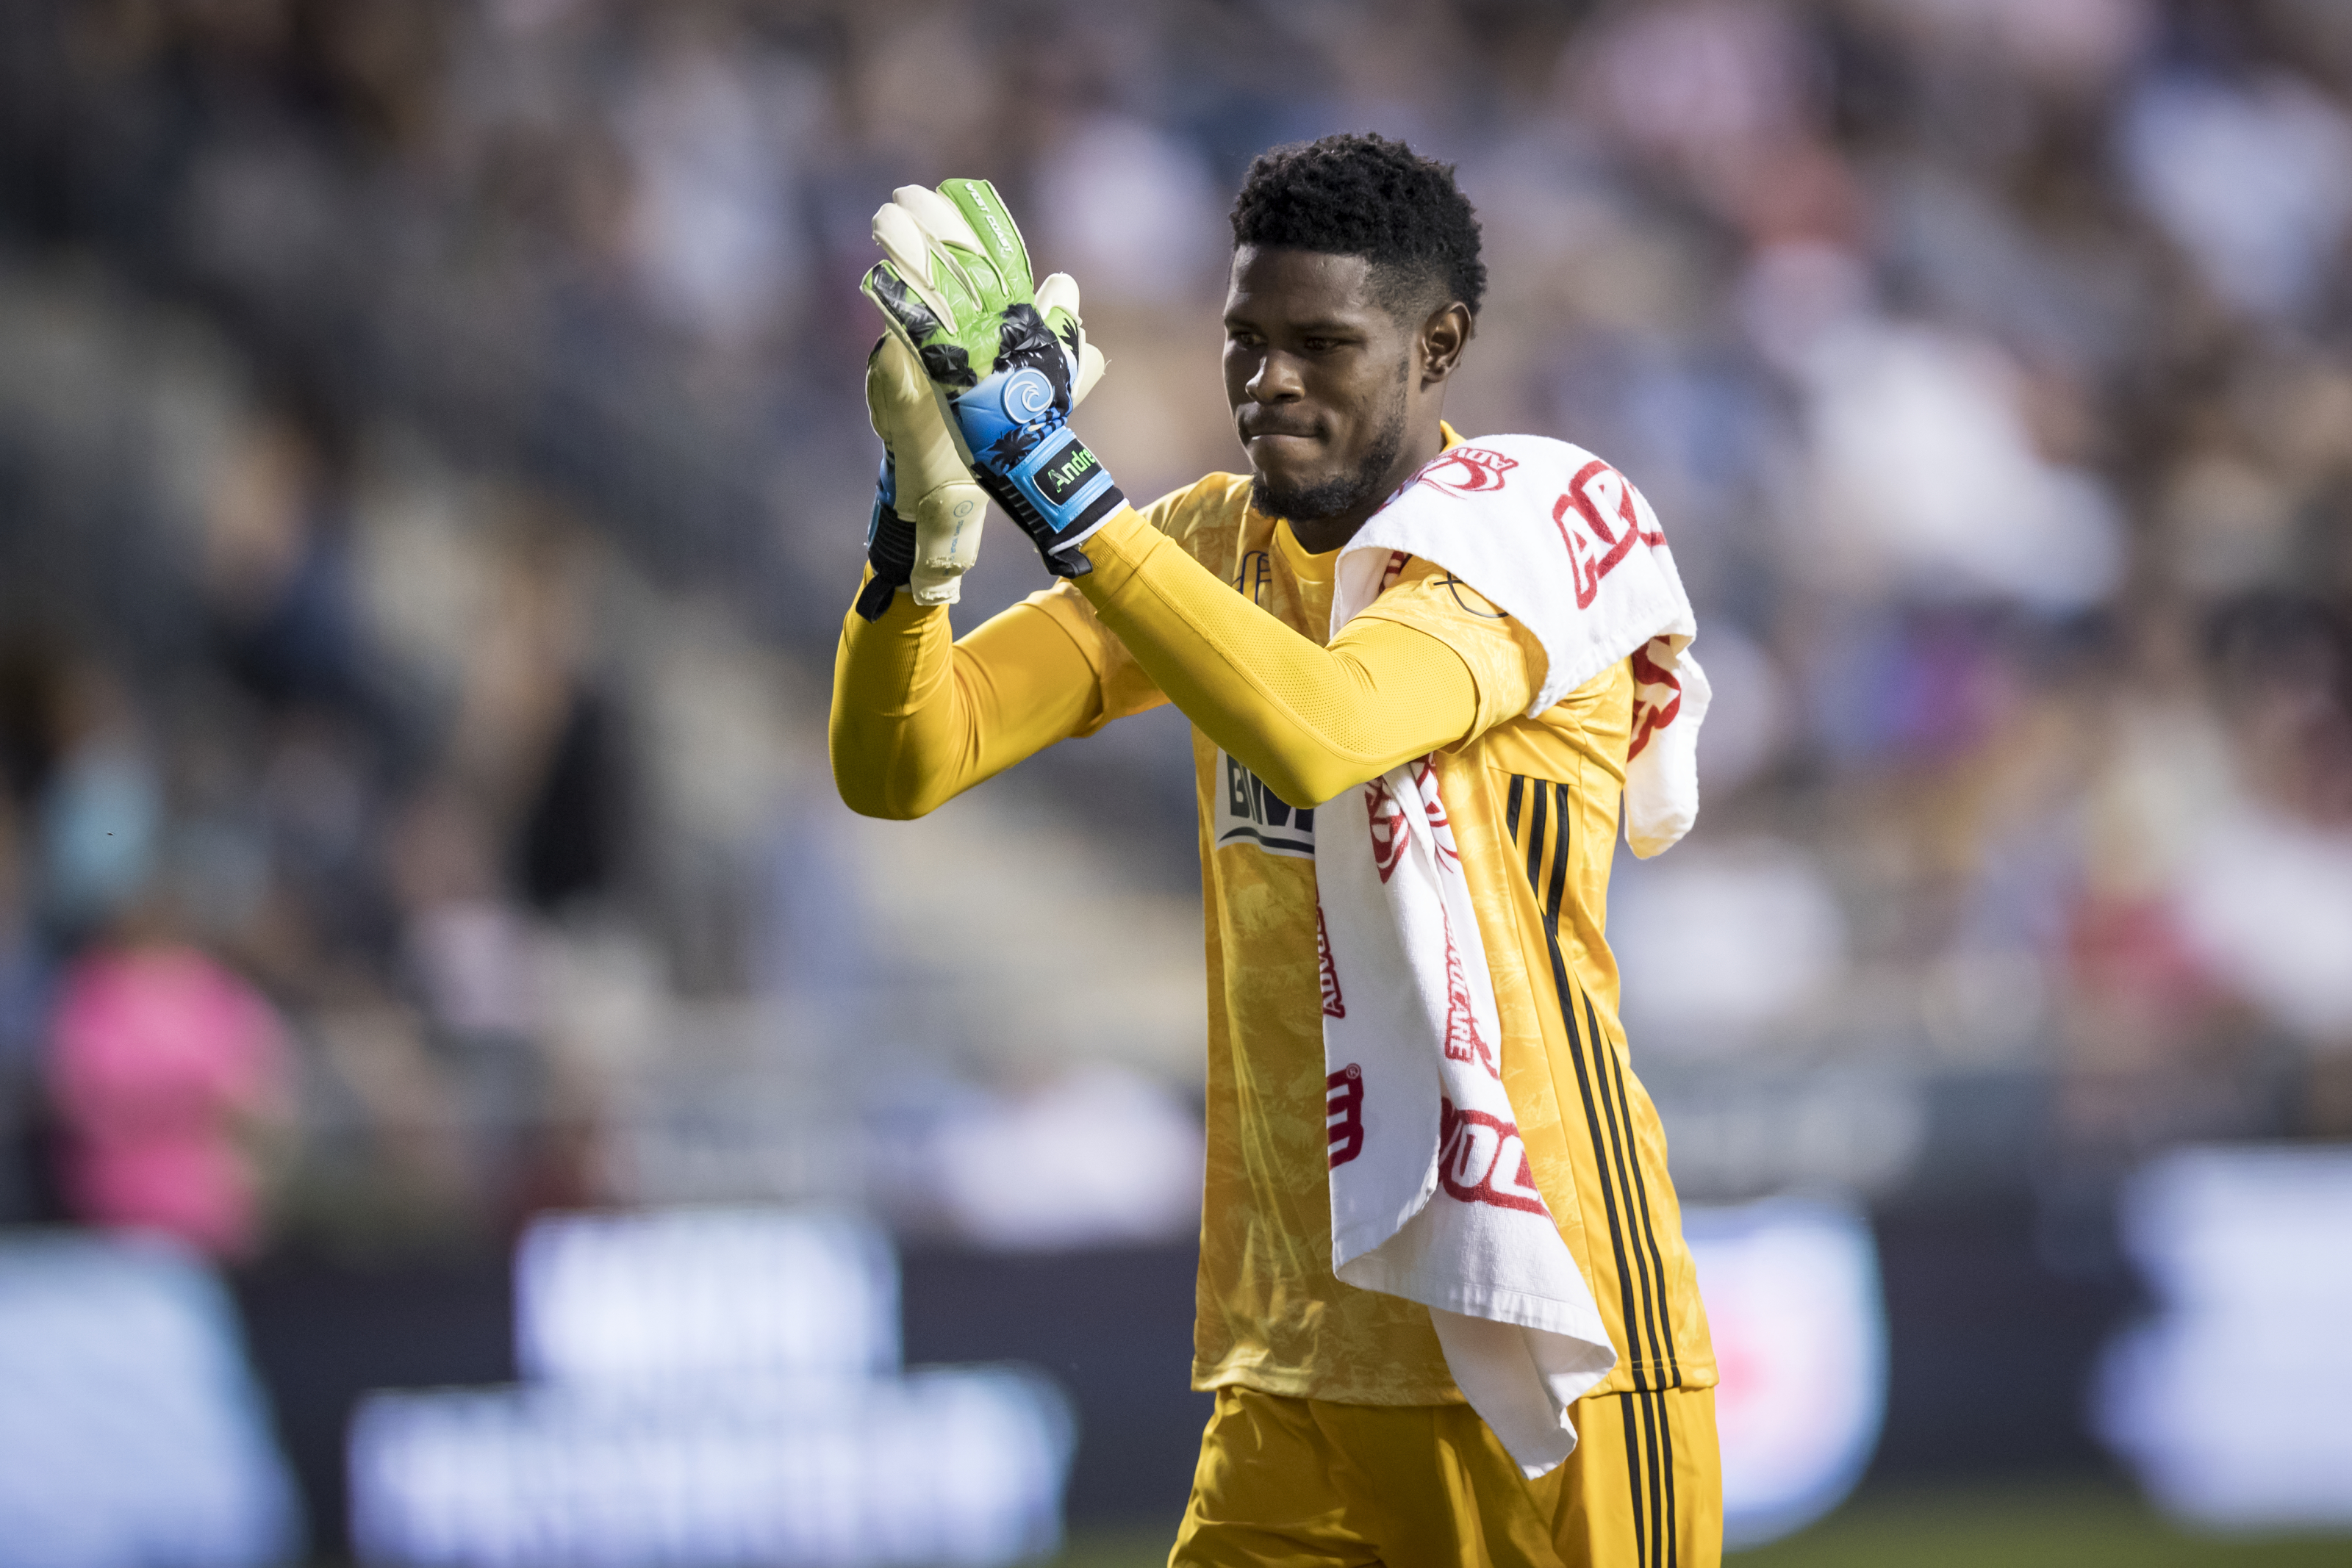 LAFC completes stunning comeback to defeat Philadelphia Union for